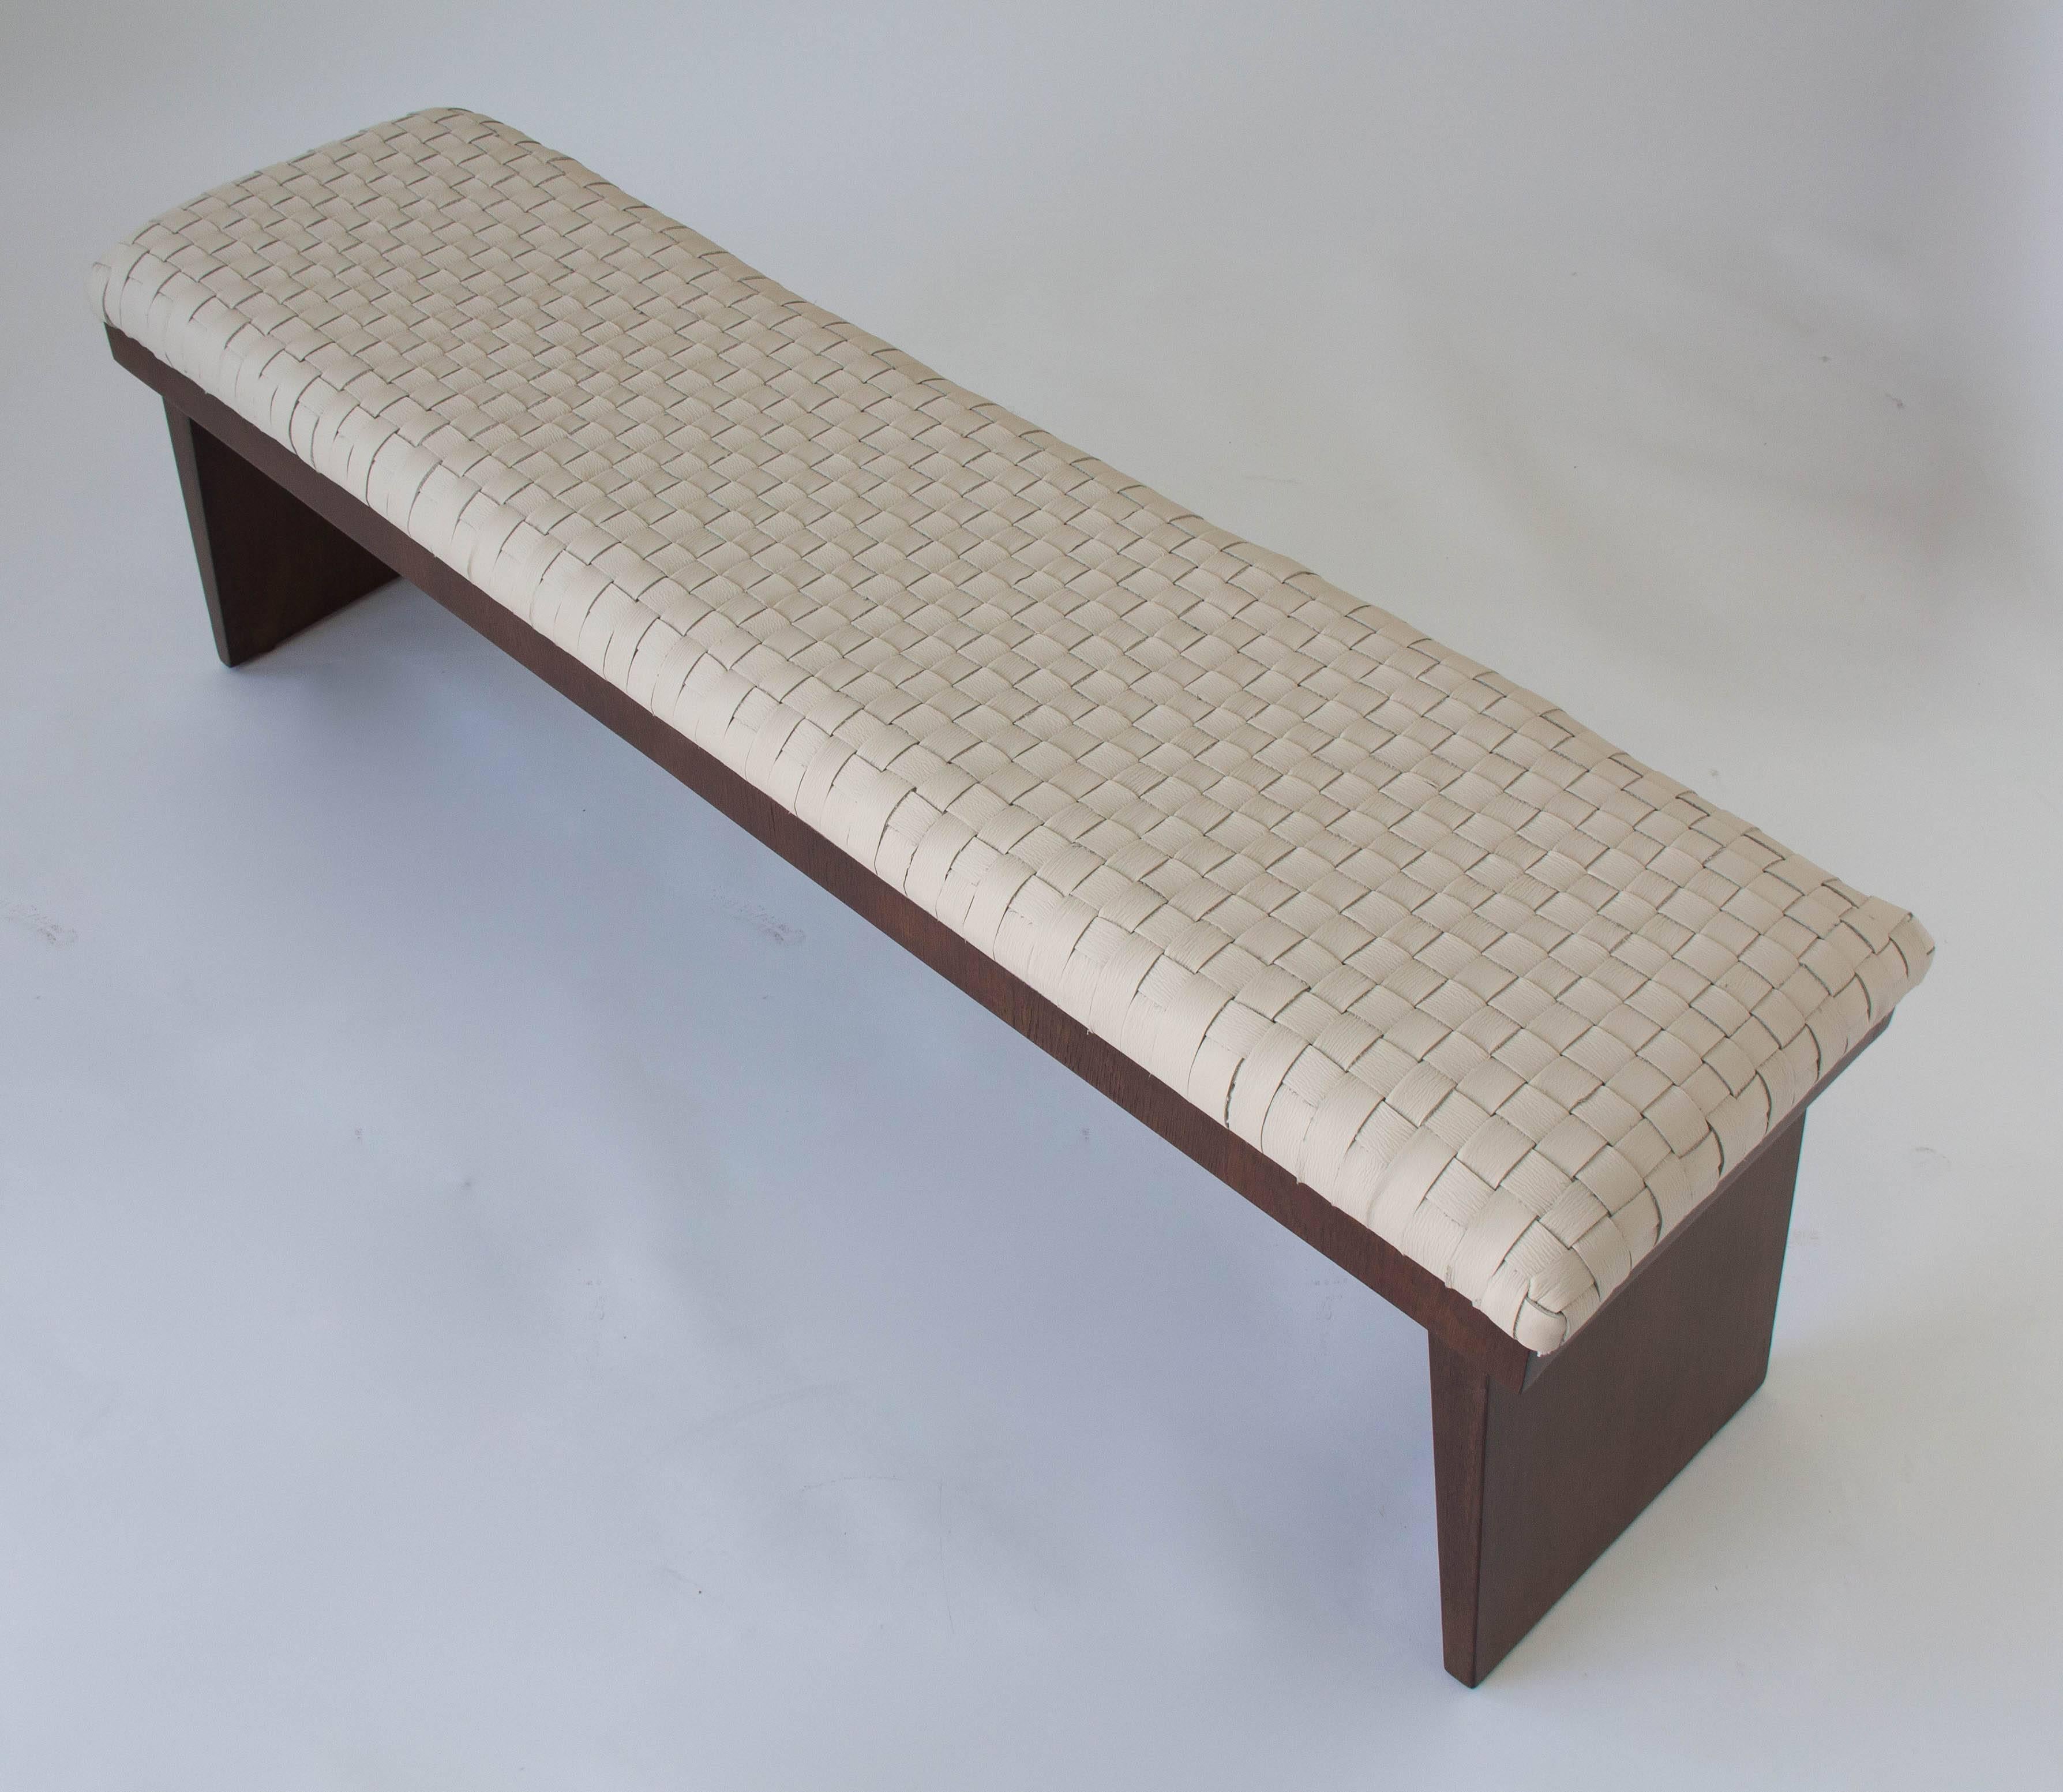 American Walnut Bench with Woven Leather Seat